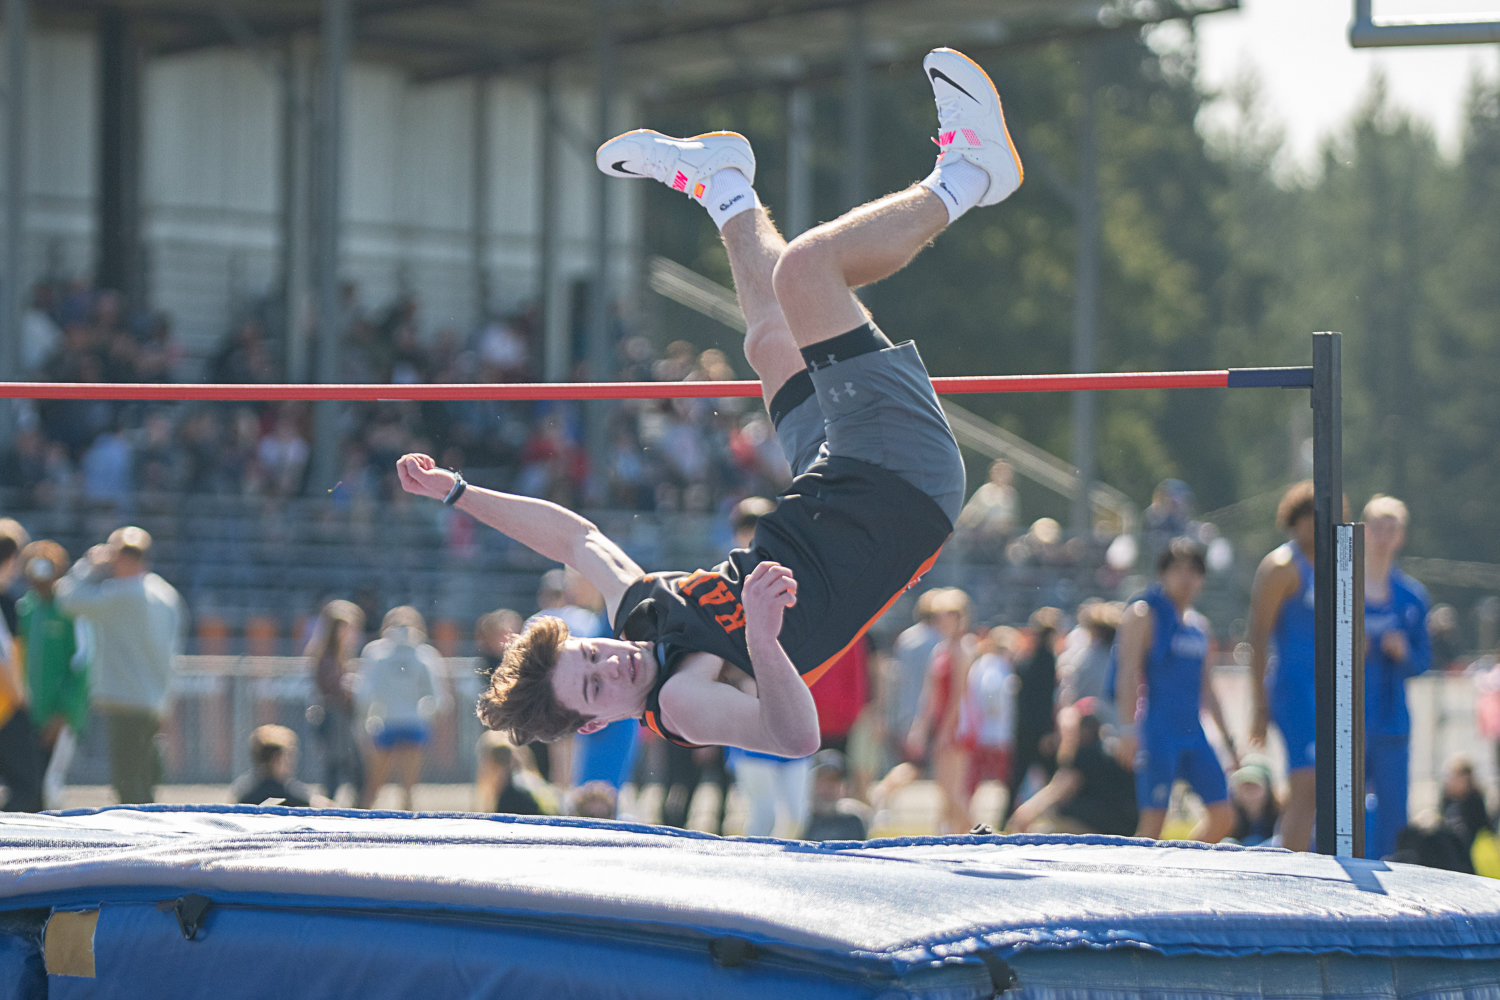 Rainier's Josh Meldrum comes down after clearing the bar in the boys high jump at the Rainier Icebreaker on March 18.